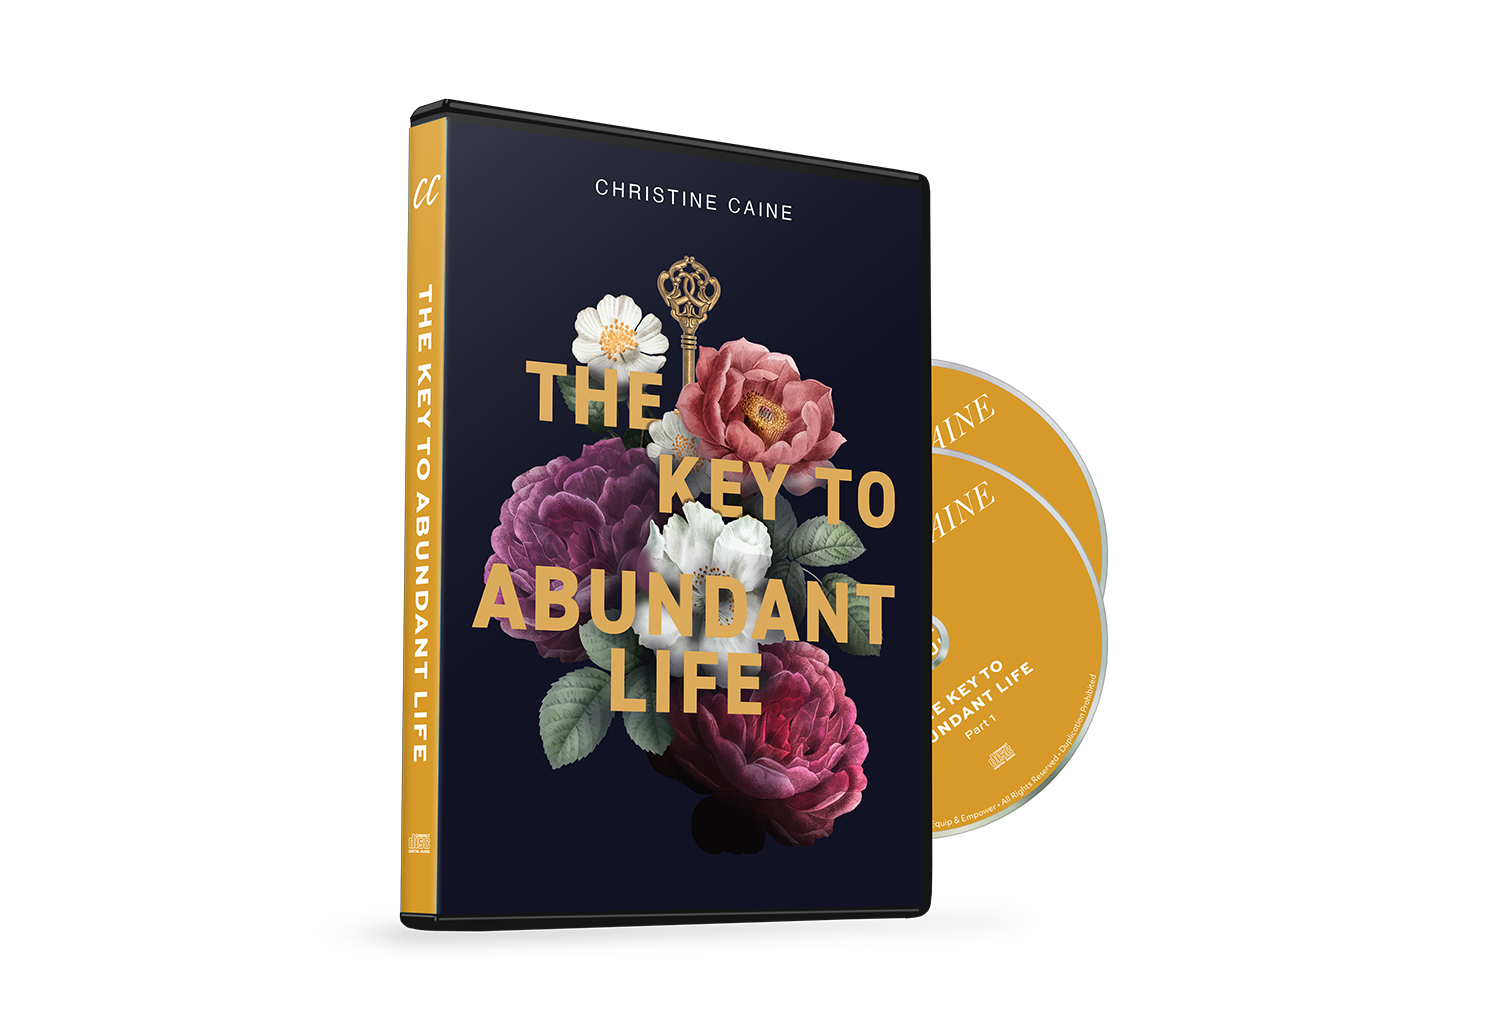 The Key to Abundant Life by Christine Caine on TBN